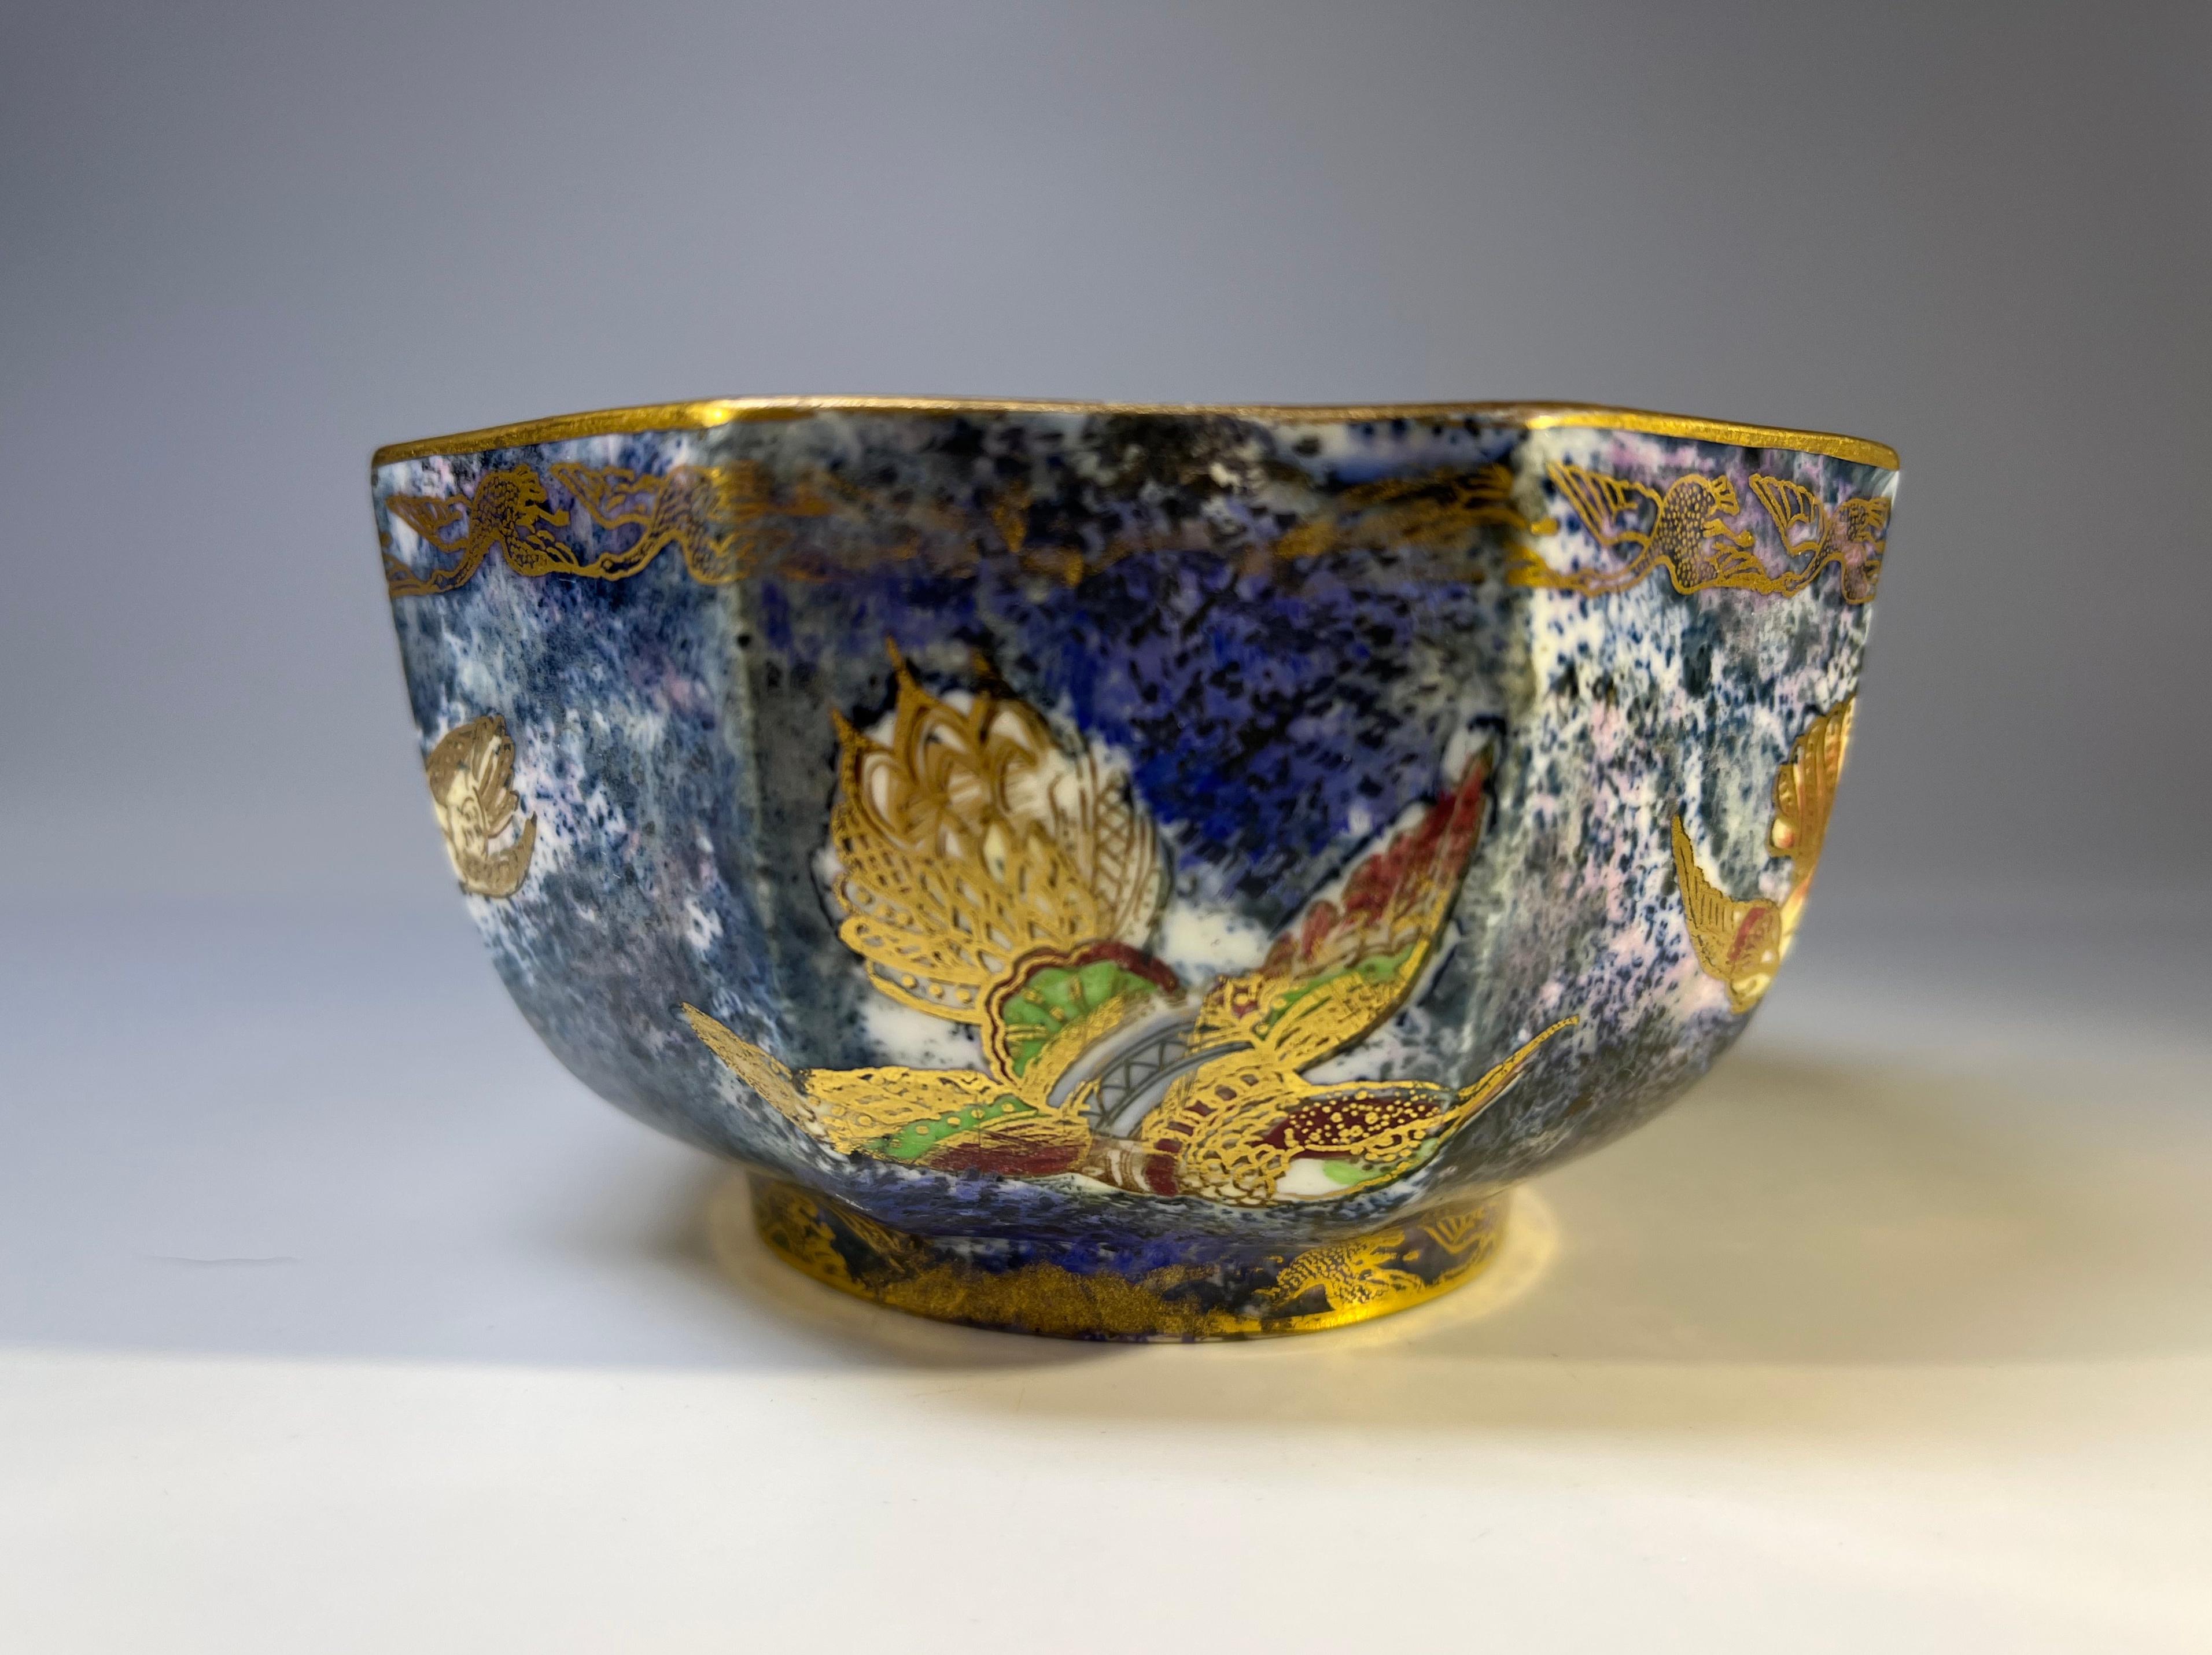 A delightful and so delicate Ordinary Lustre octagonal bowl by Daisy Makeig Jones for Wedgwood, England.
A wonderful little bowl.
The exterior is decorated with gilded hummingbirds on a blue mottled background, with small gilded birds around top rim